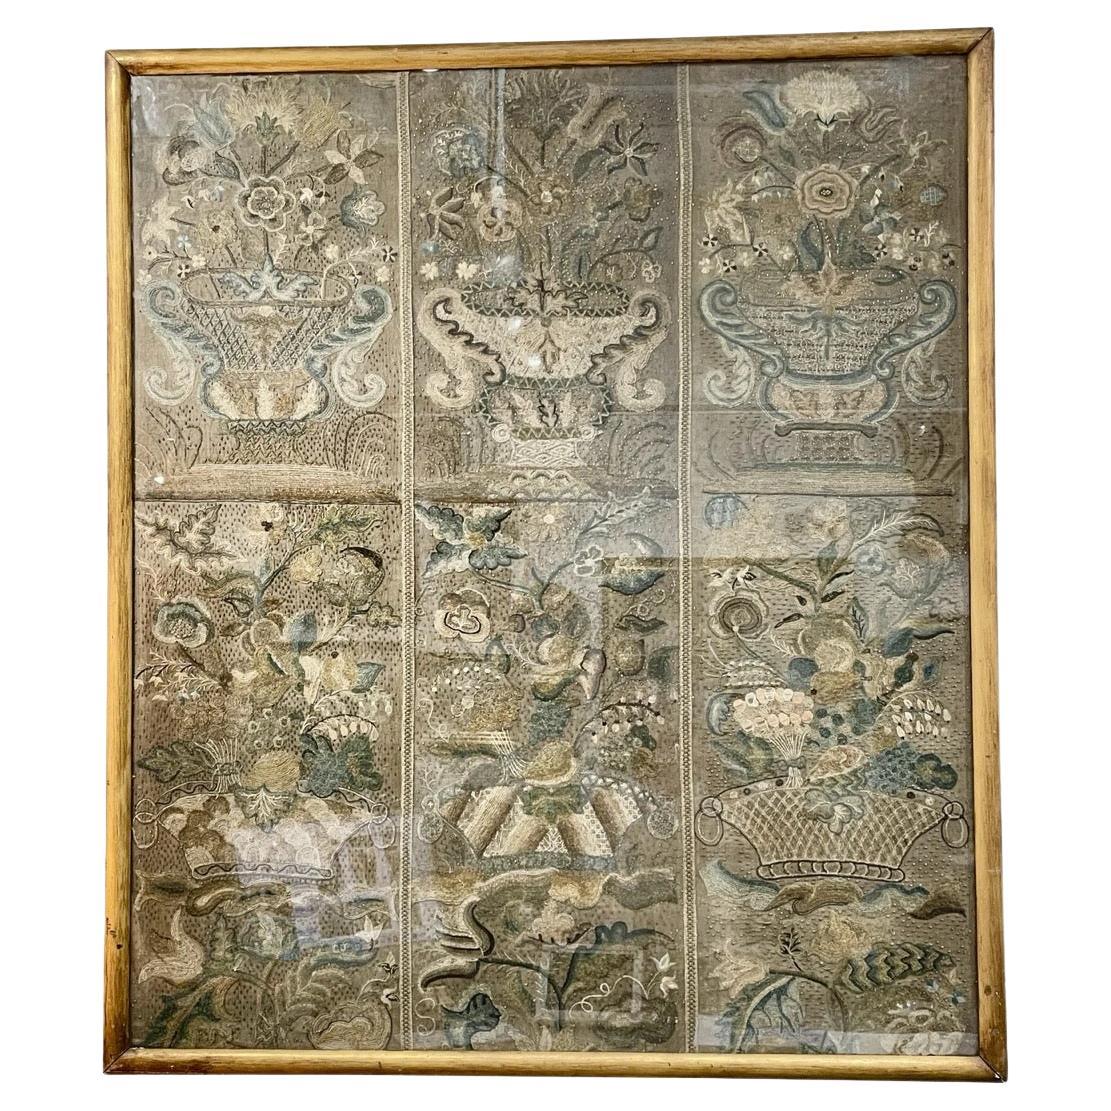 Rare Framed Six Panel Early Embroidery, 17th-18th C.